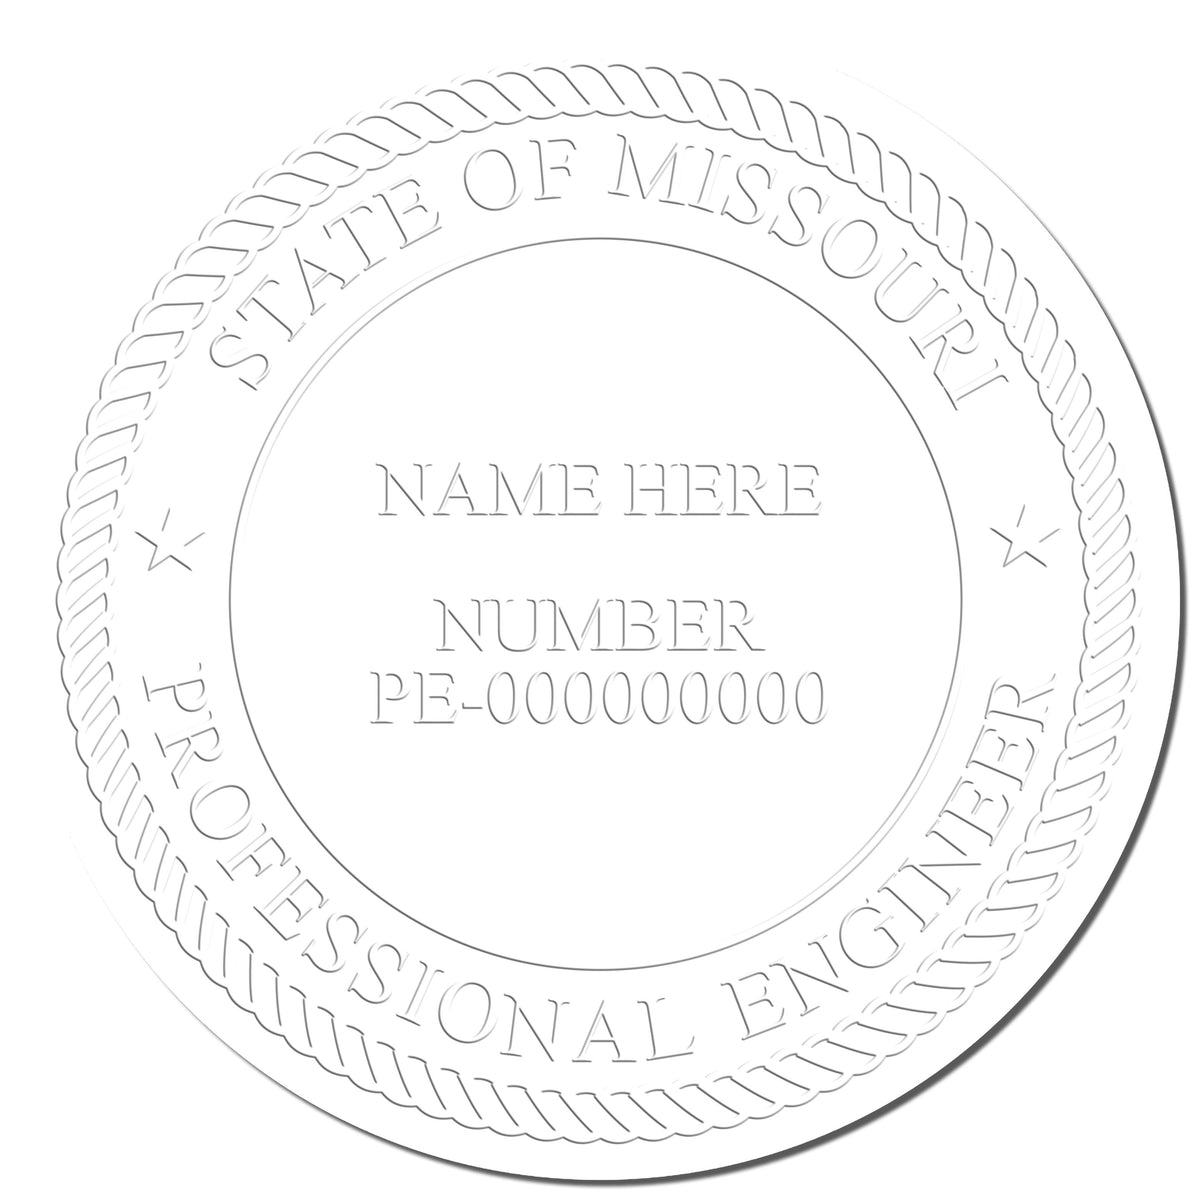 This paper is stamped with a sample imprint of the State of Missouri Extended Long Reach Engineer Seal, signifying its quality and reliability.